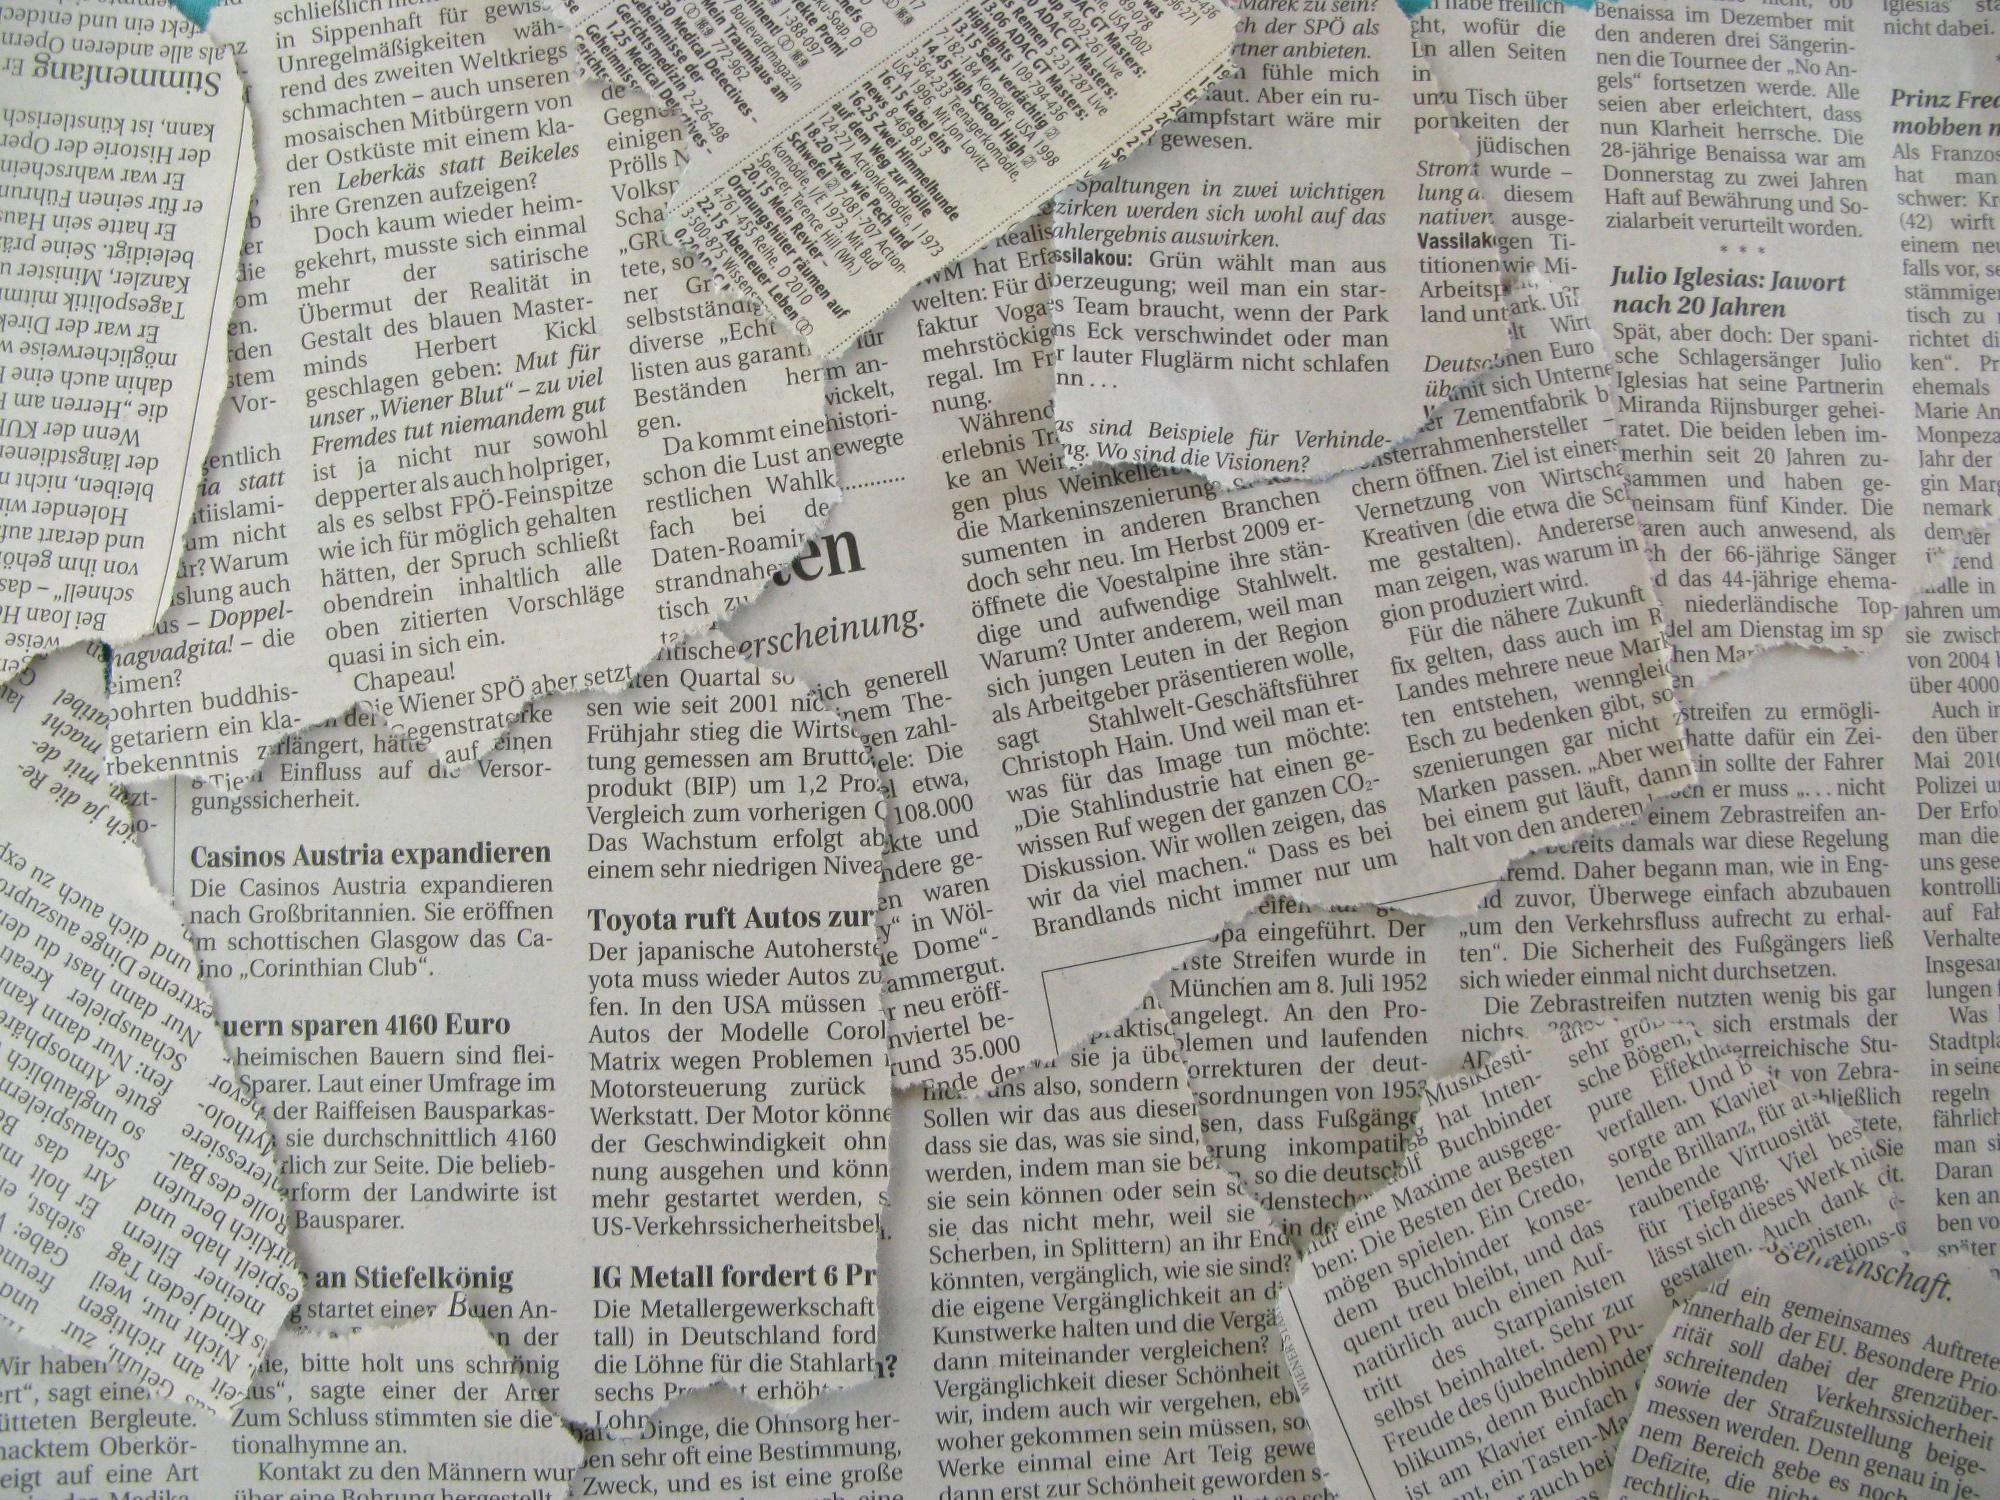 Newspaper Texture Newspapers Background Old